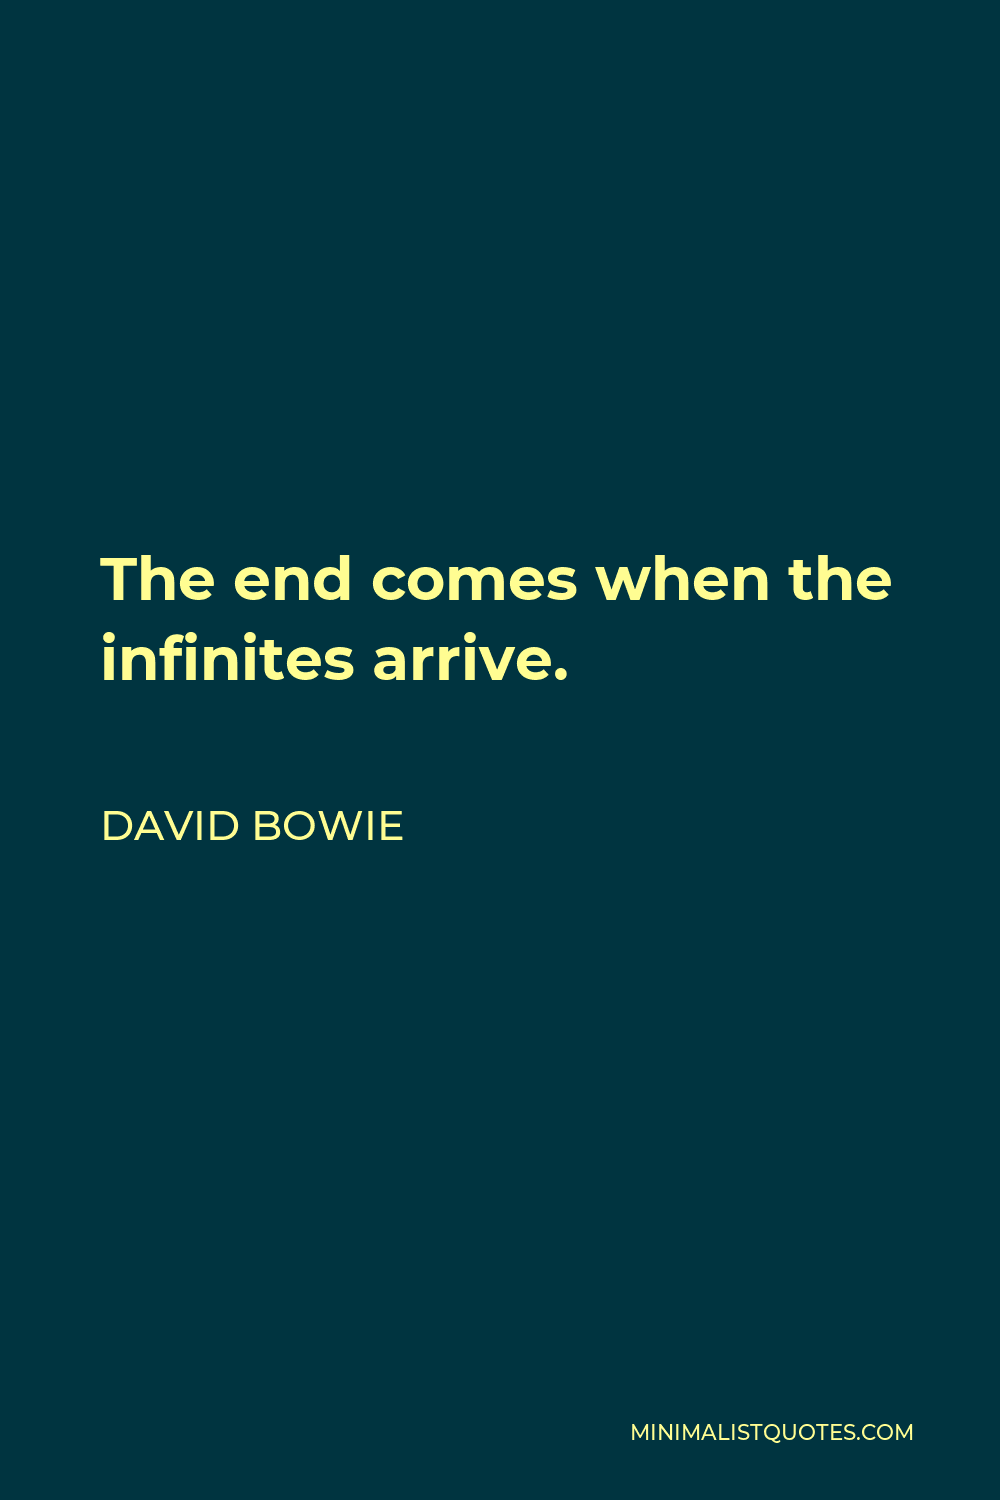 David Bowie Quote - The end comes when the infinites arrive.